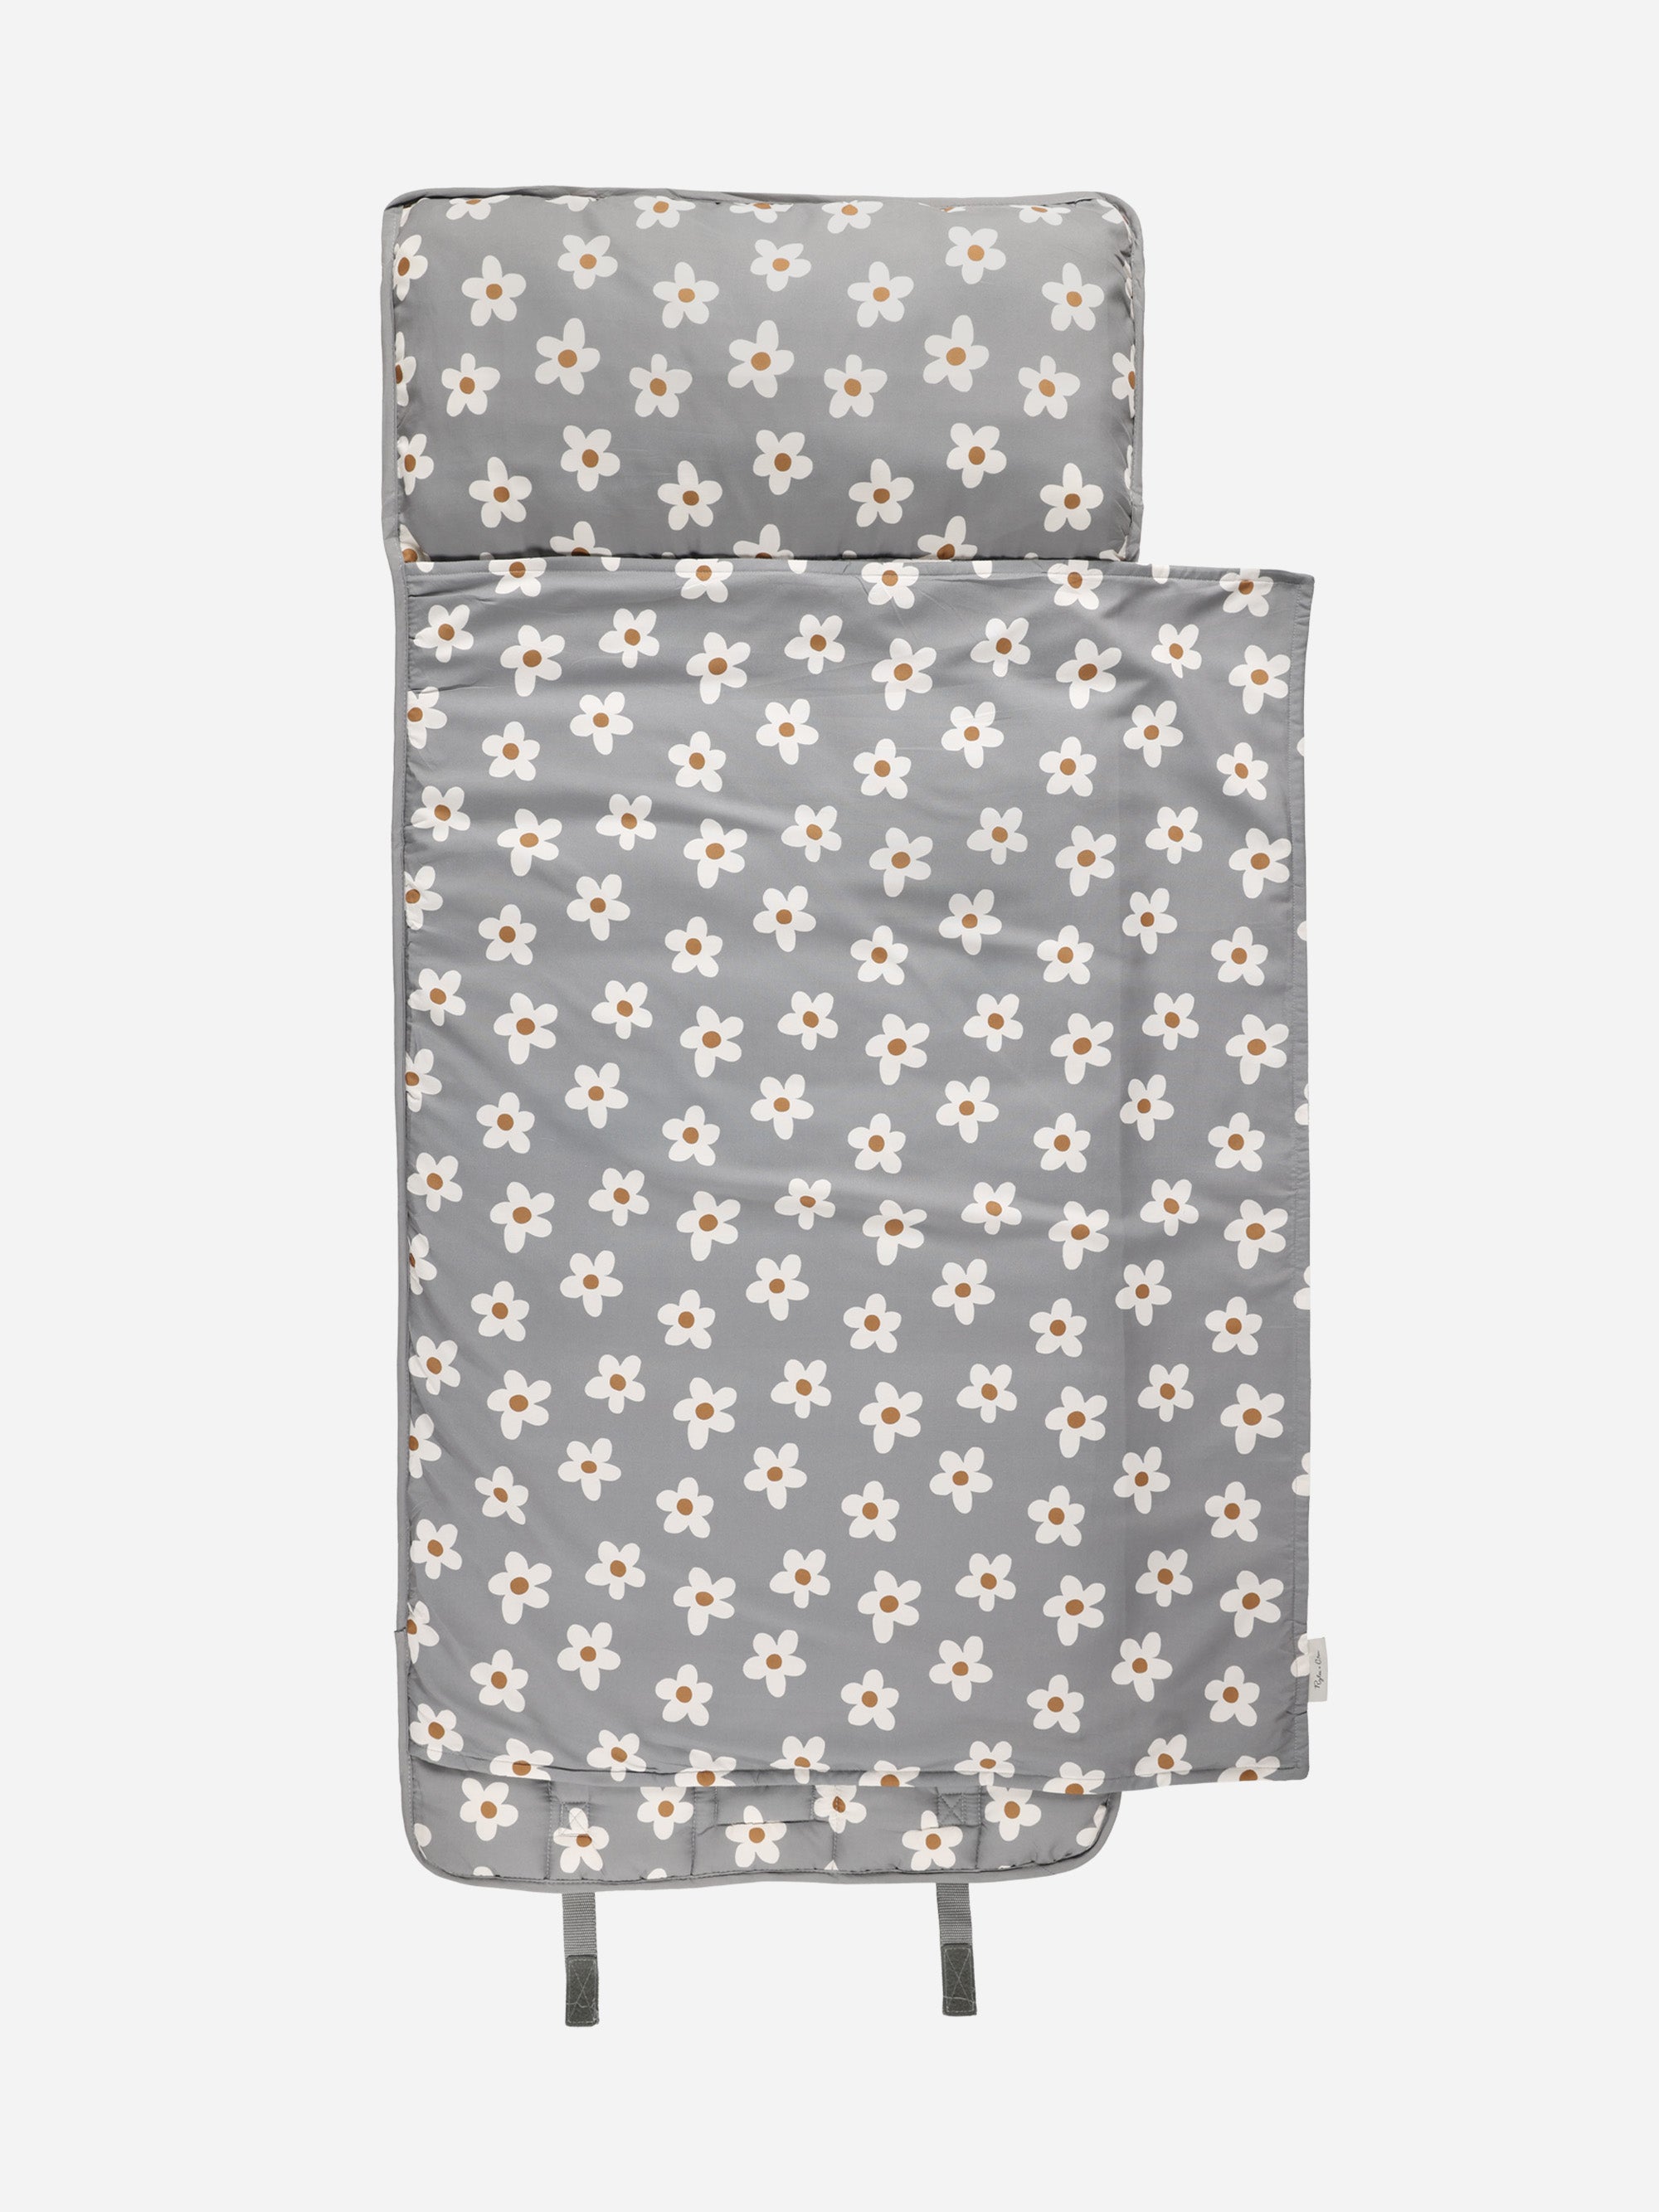 Nap Mat || Blue Daisy - Rylee + Cru | Kids Clothes | Trendy Baby Clothes | Modern Infant Outfits |